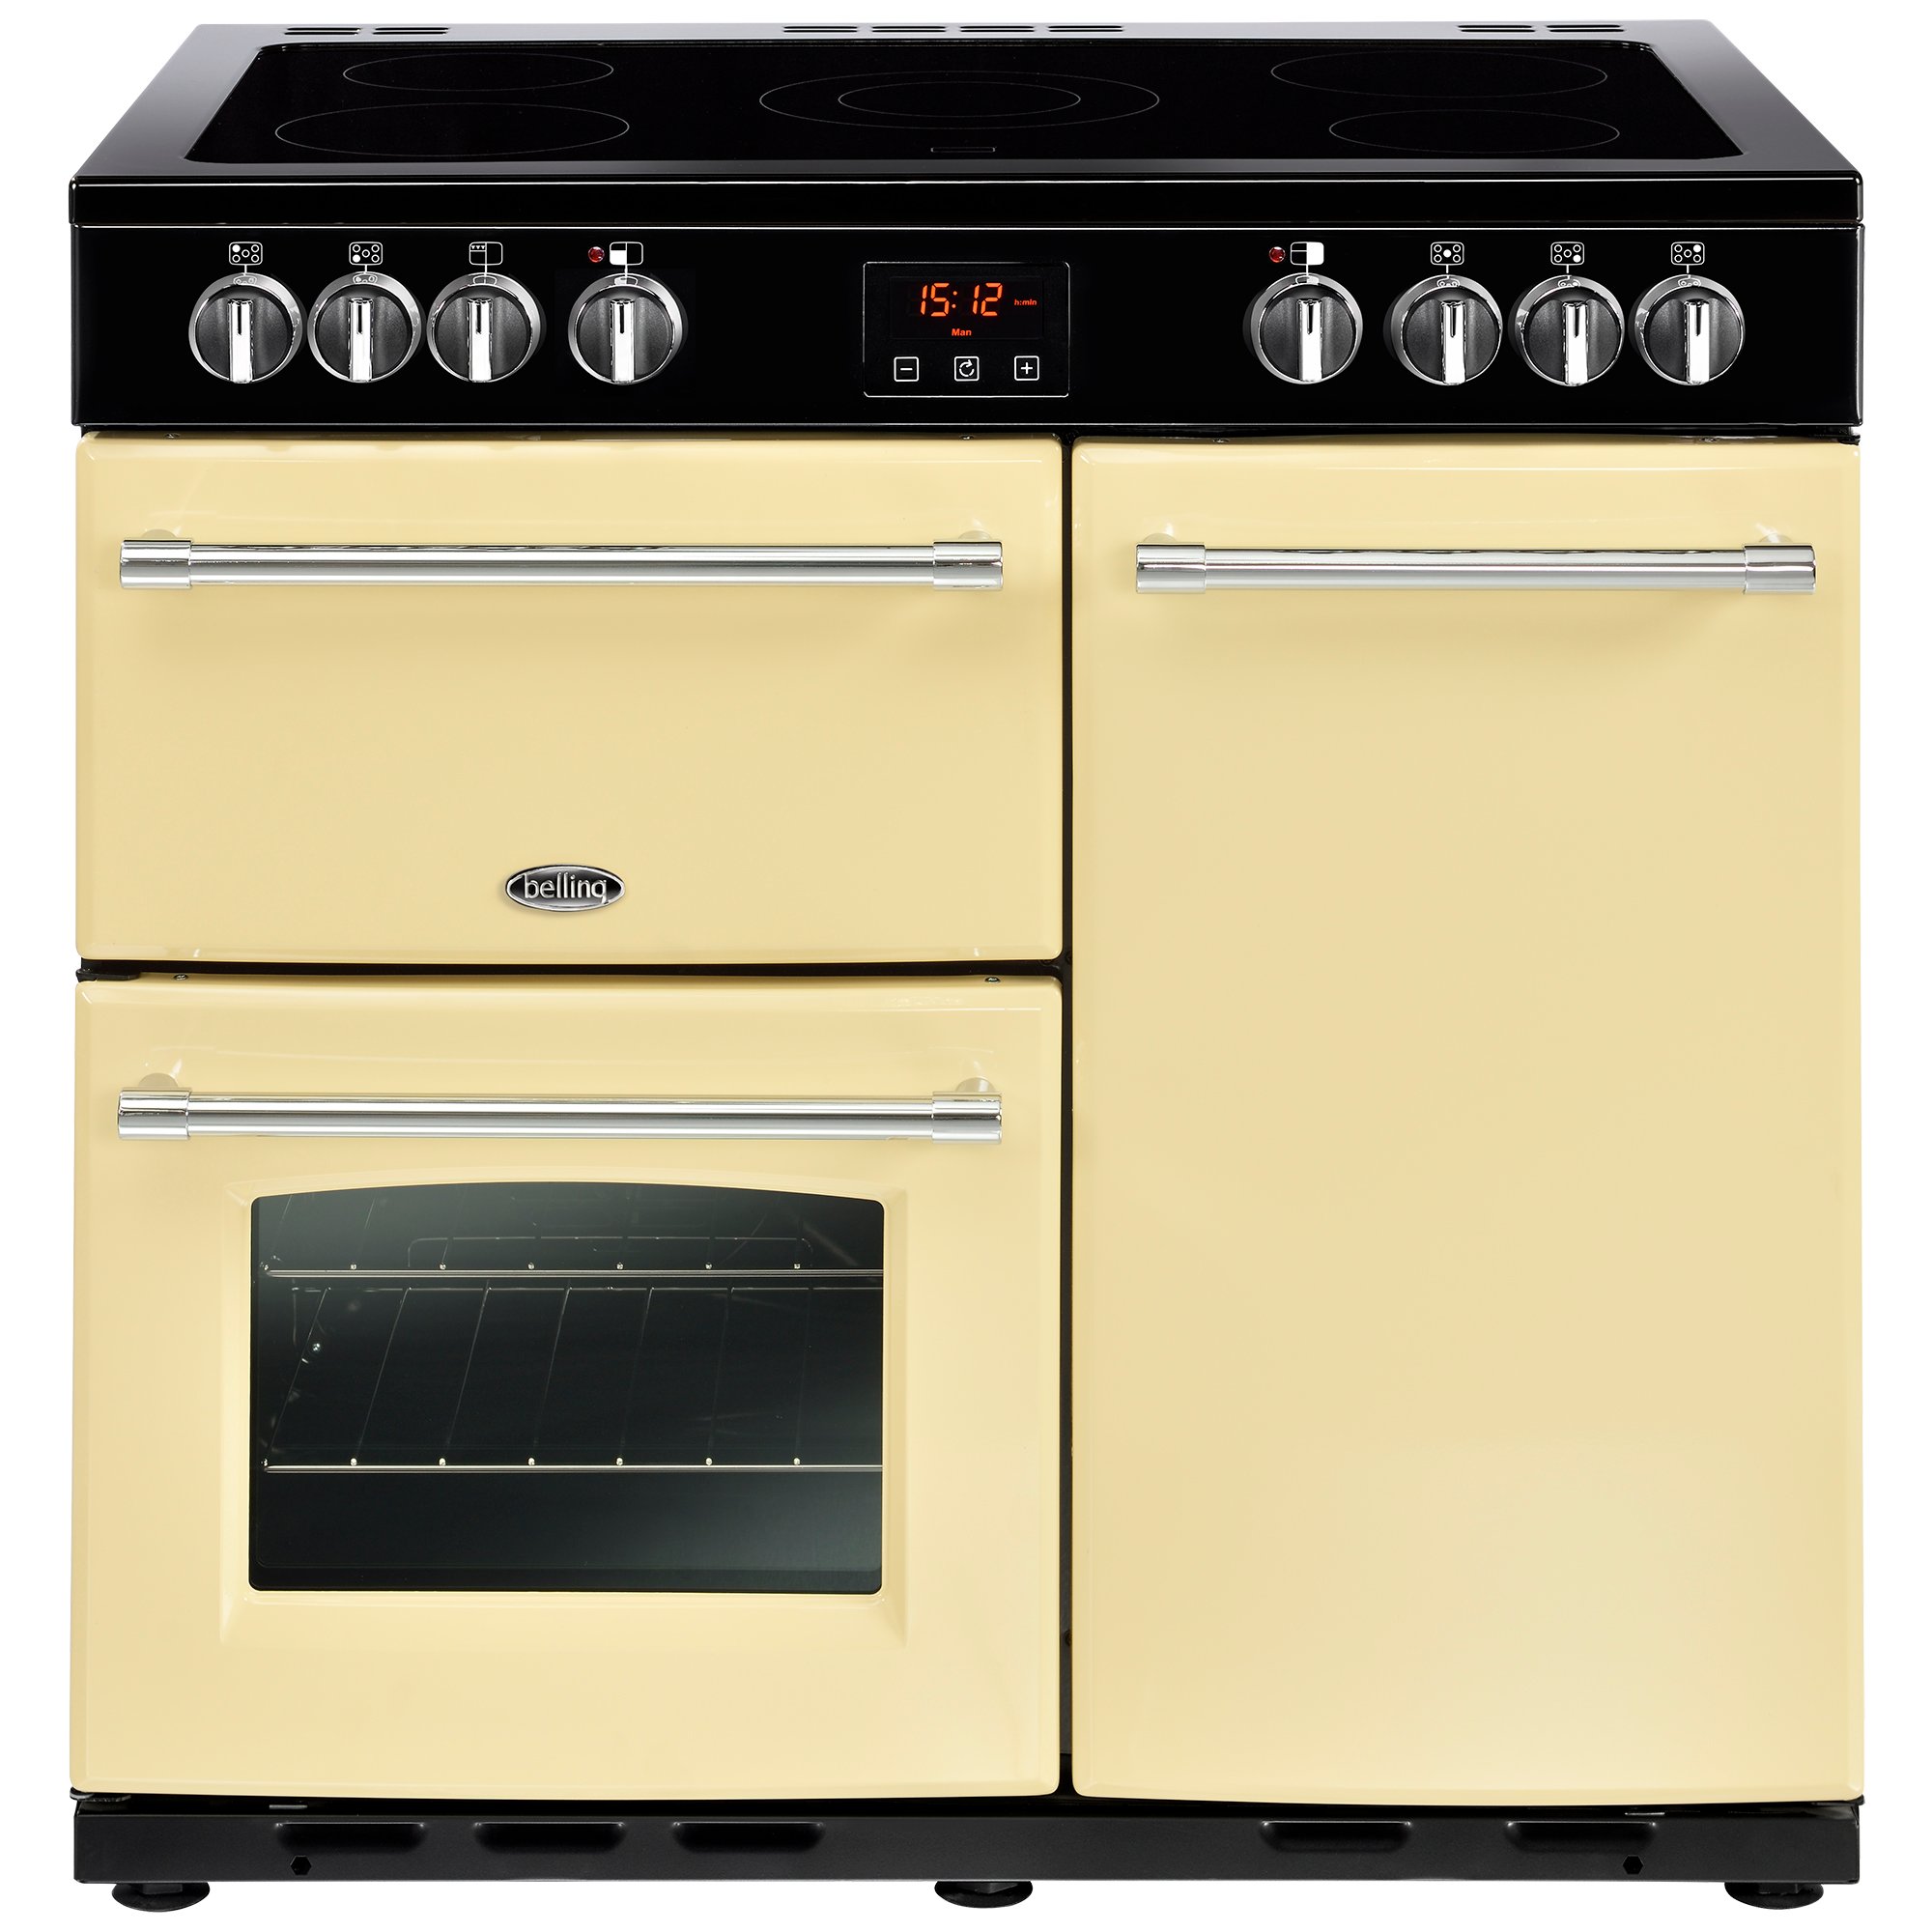 90cm electric range cooker with 5 zone ceramic hob, Maxi-Clock, market leading tall oven and easy clean enamel.